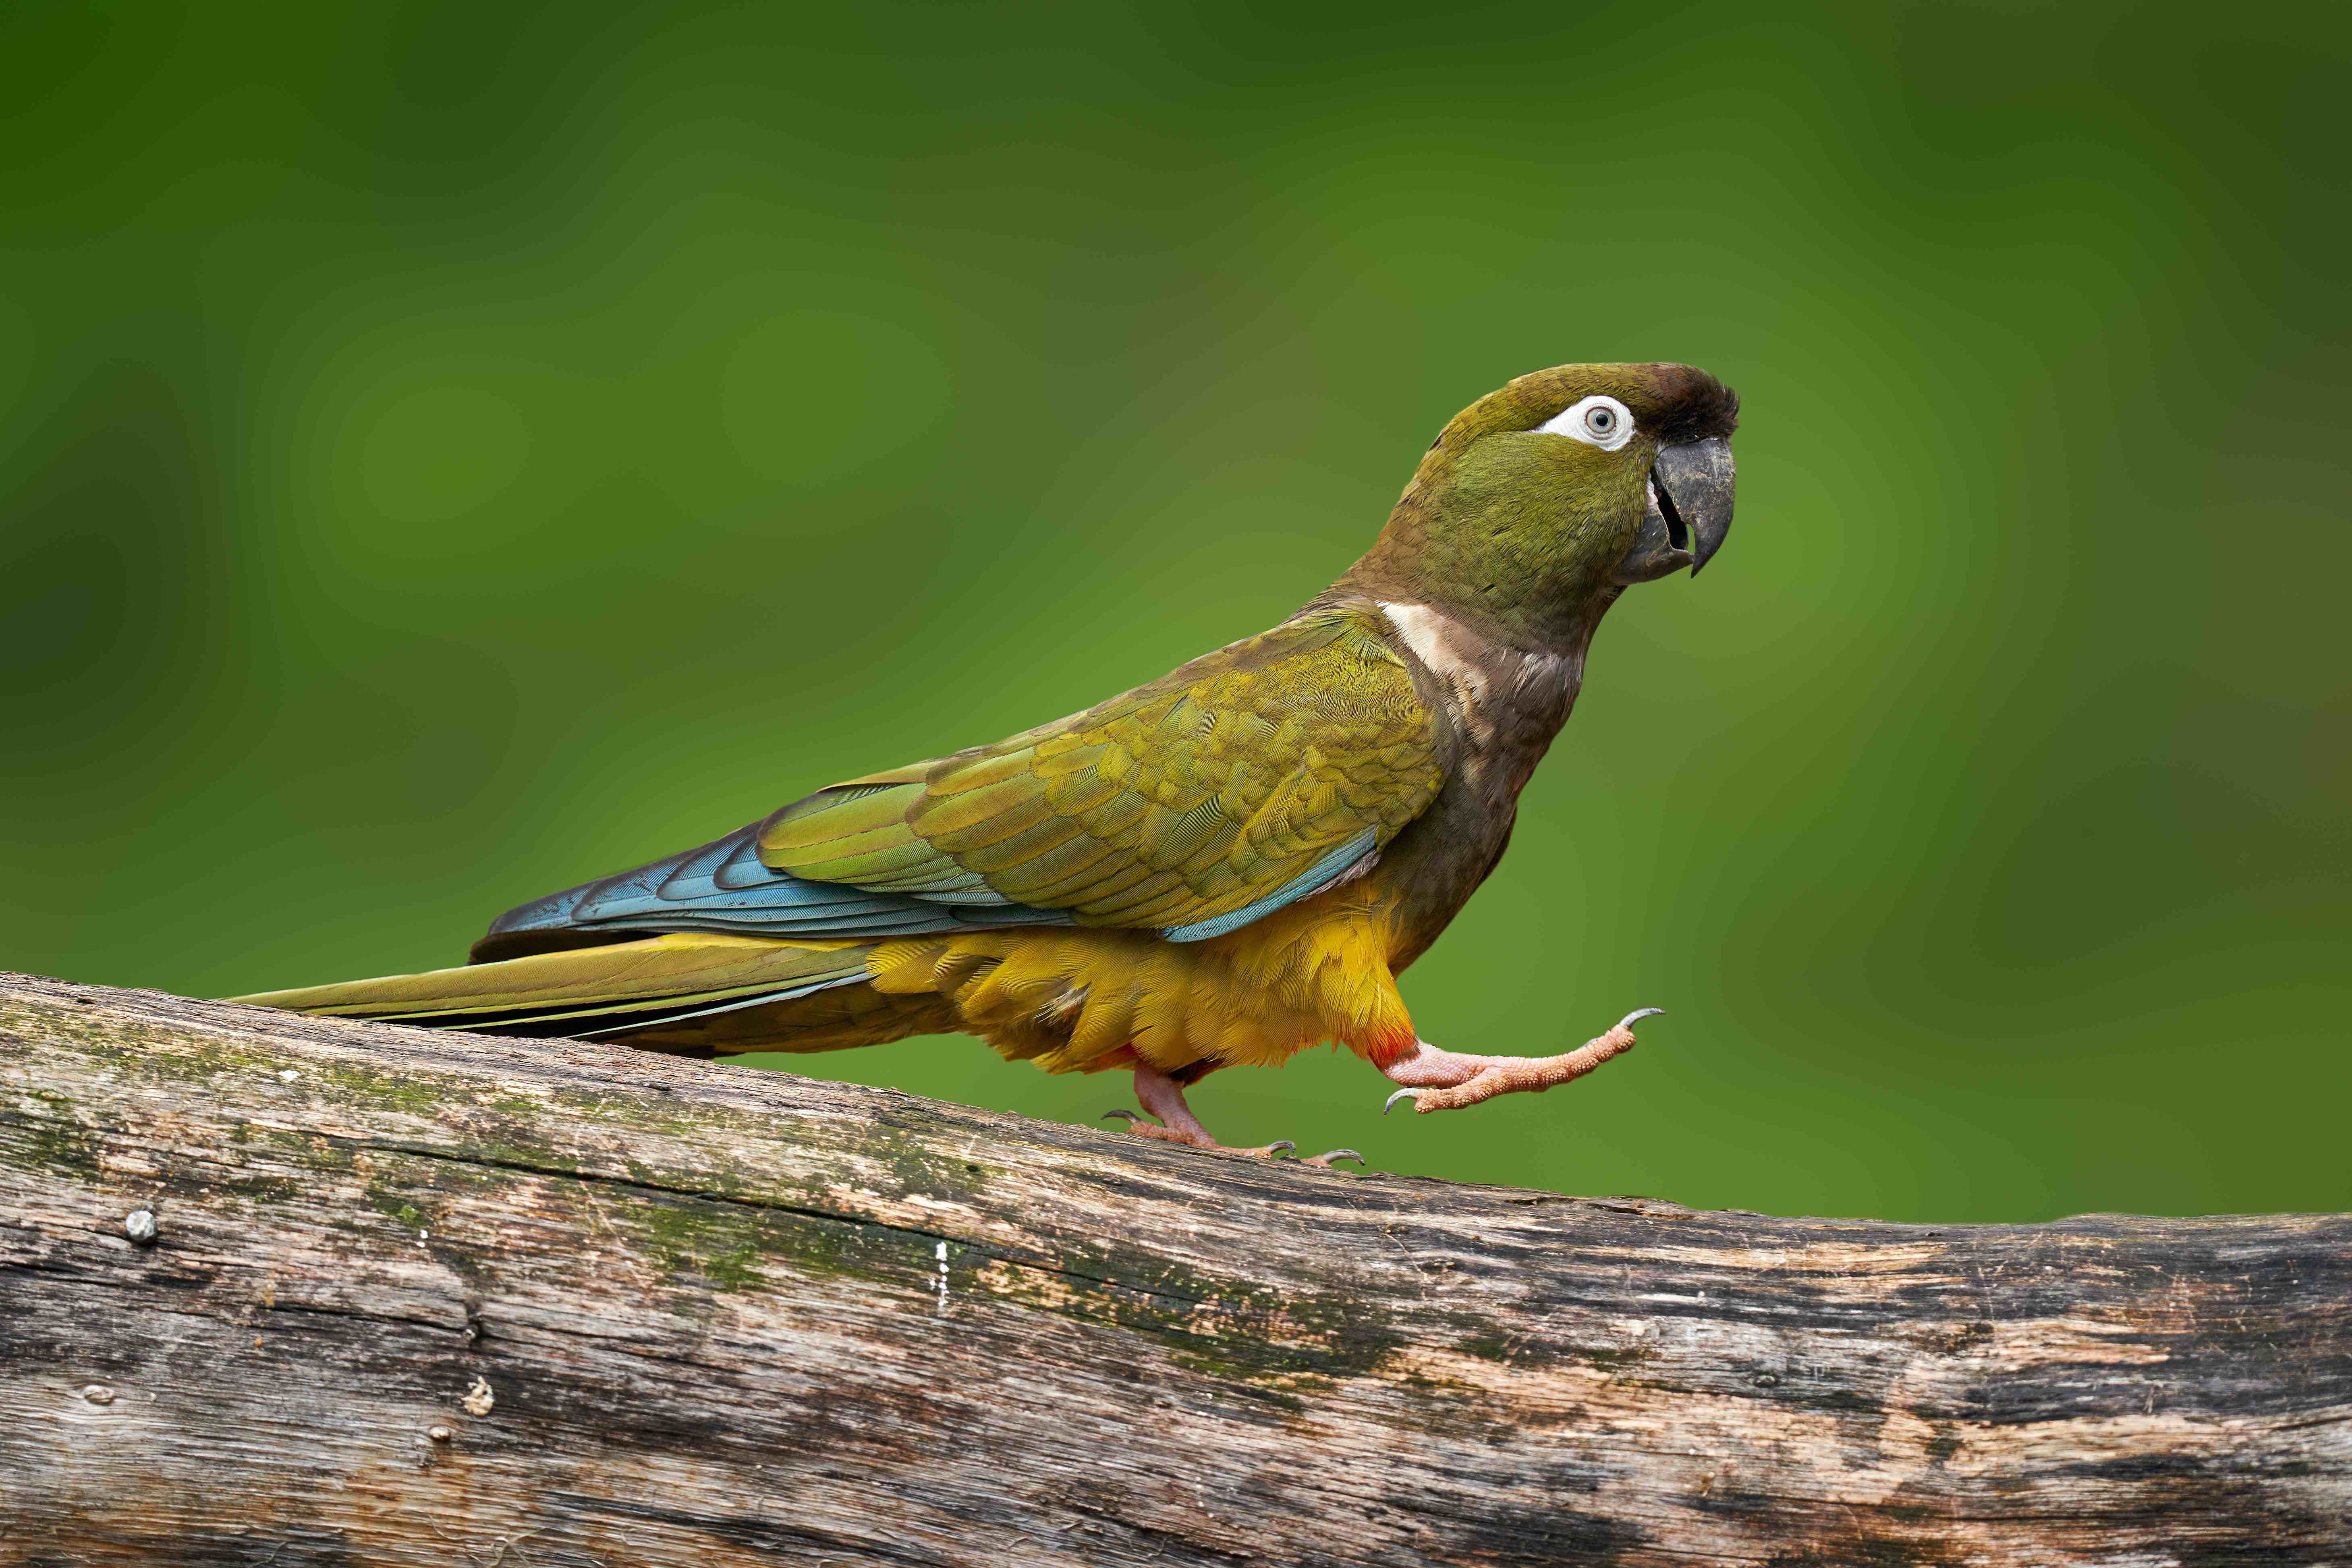 Parrots: List of Types, Facts, Care as Pets, Pictures